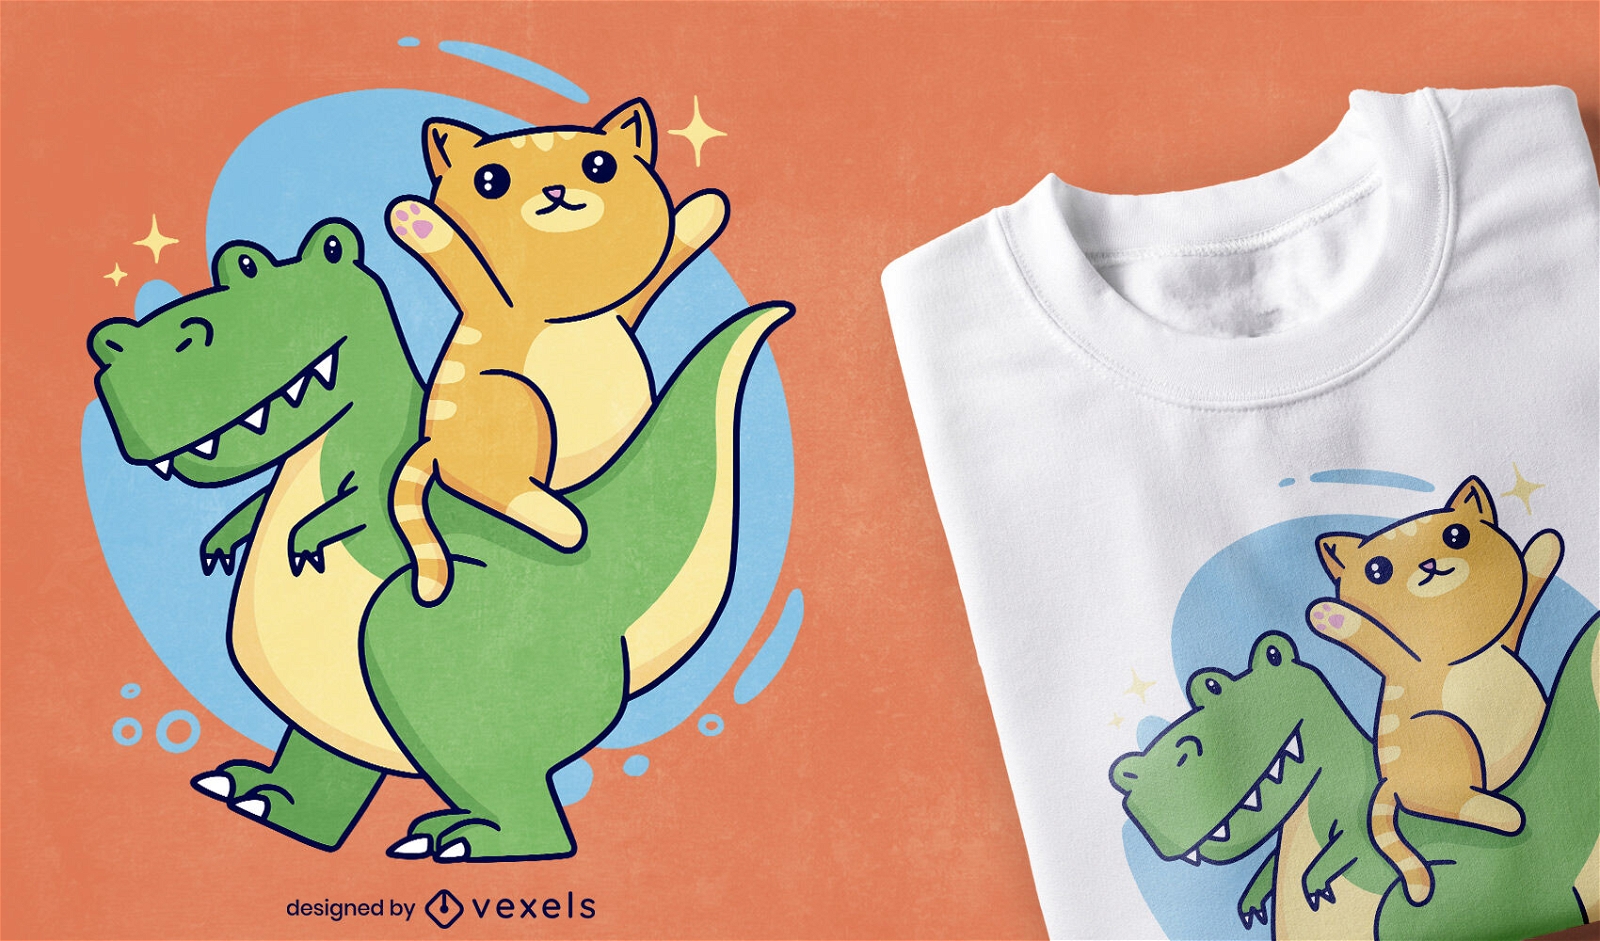 T-rex and kitty t-shirt design